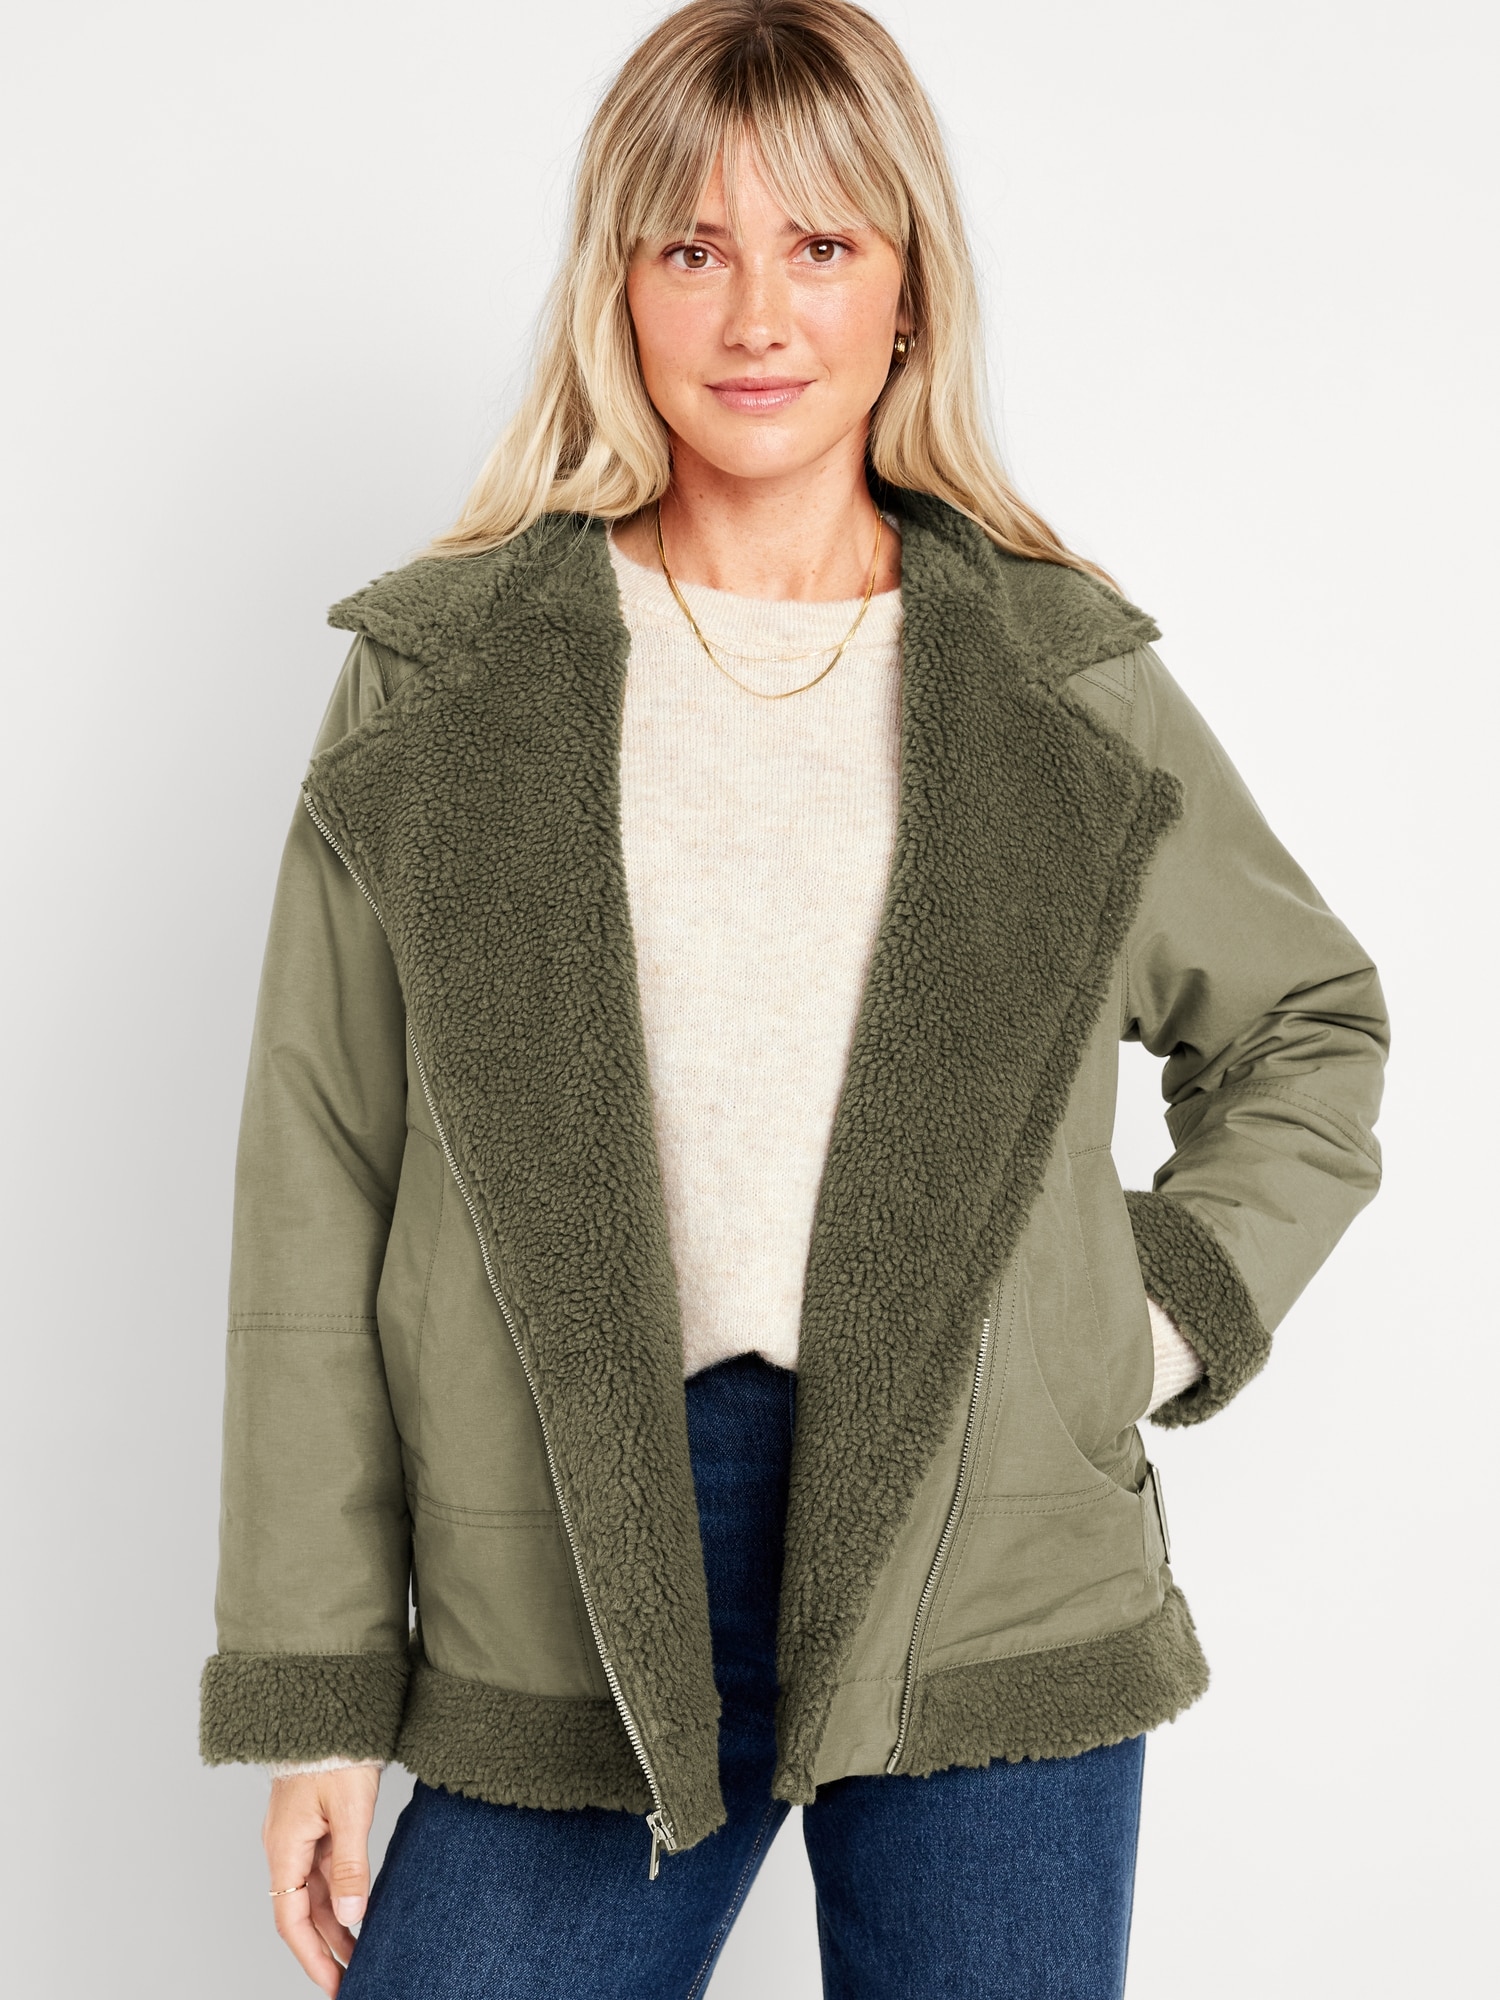 The Best Sherpa Jackets For Women: A Try-On